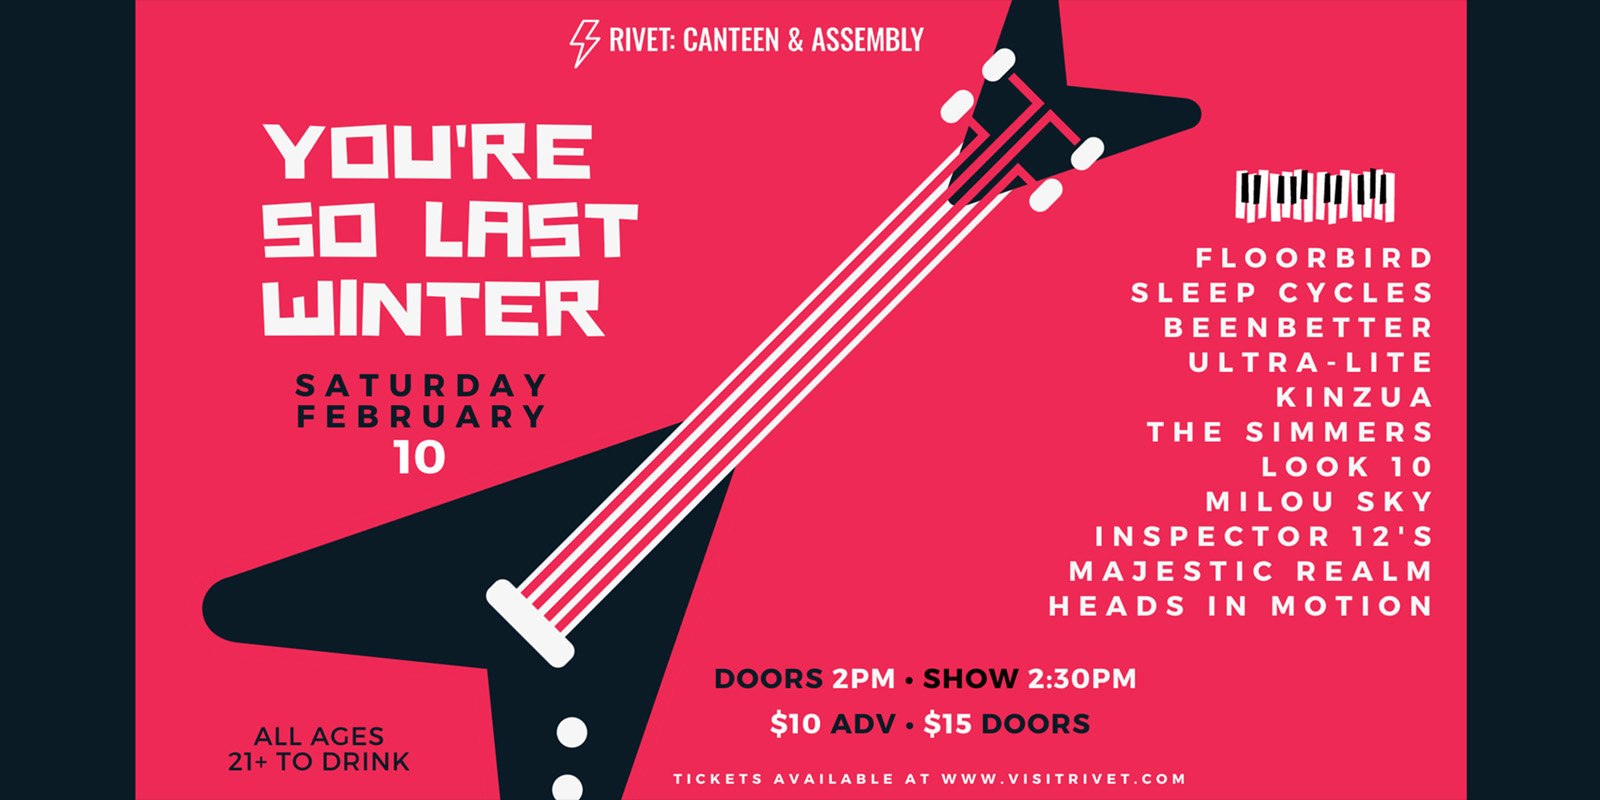 You're So Last Winter 10 Band Festival at Rivet: Canteen & Assembly on Saturday, February 10, 2024. Doors: 2:00 PM. Show: 2:30 PM. Be there!